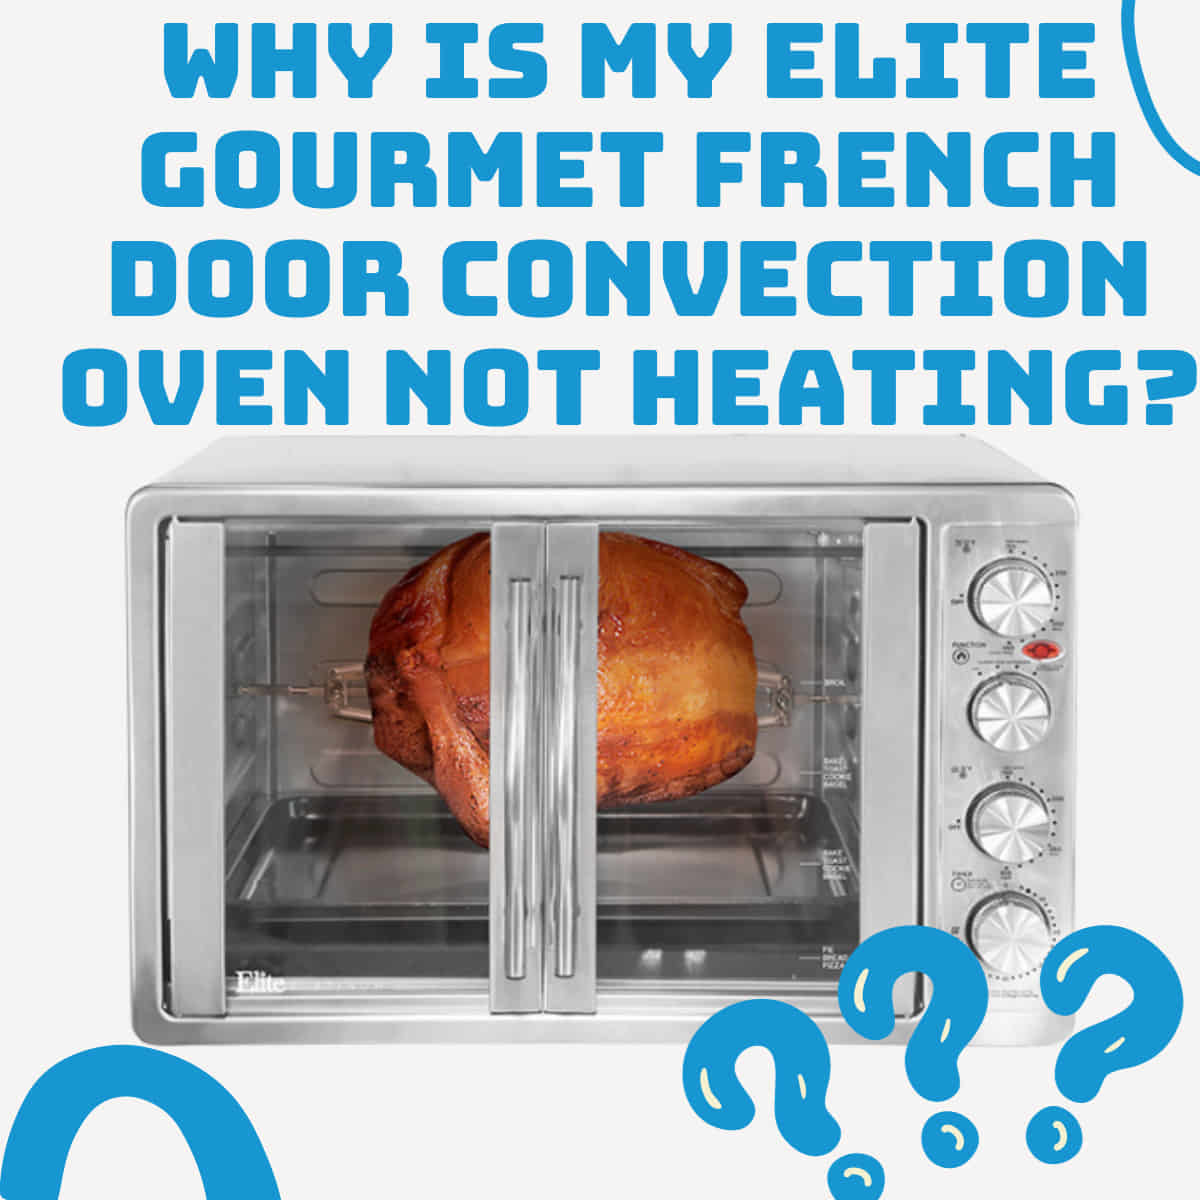 Why is my Elite Gourmet French Door Convection Oven not heating